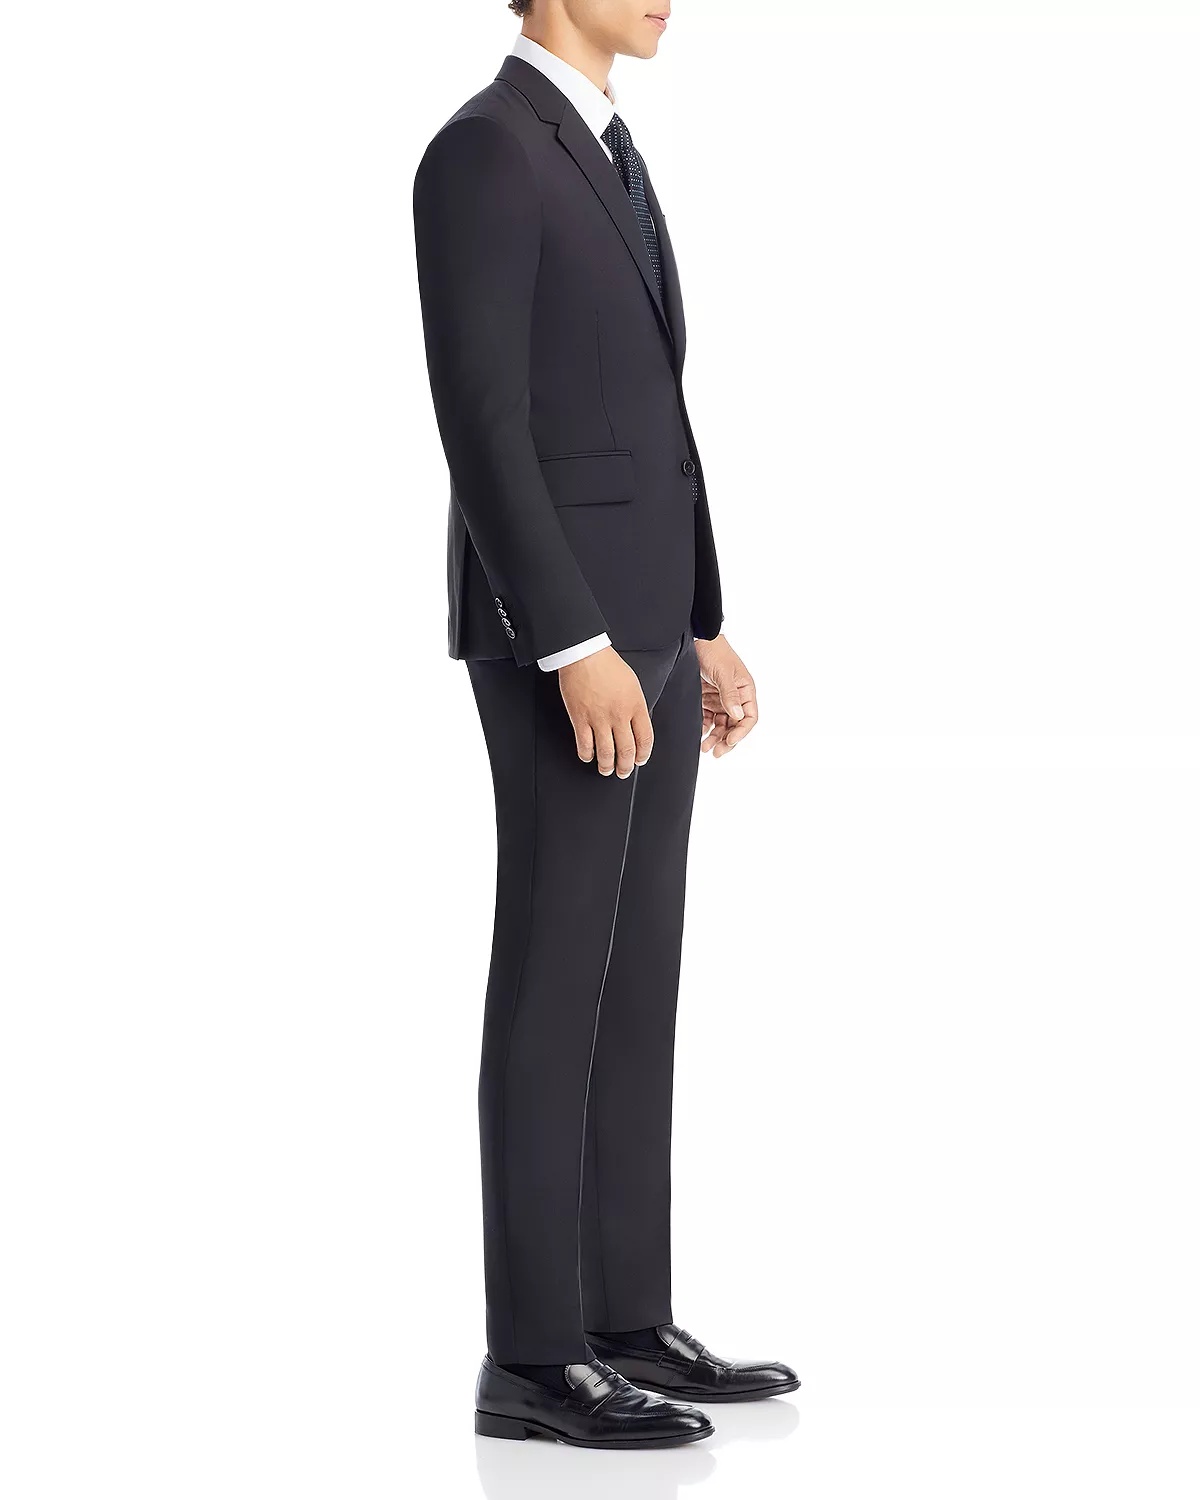 Soho Wool & Mohair Extra Slim Fit Suit - 100% Exclusive - 3